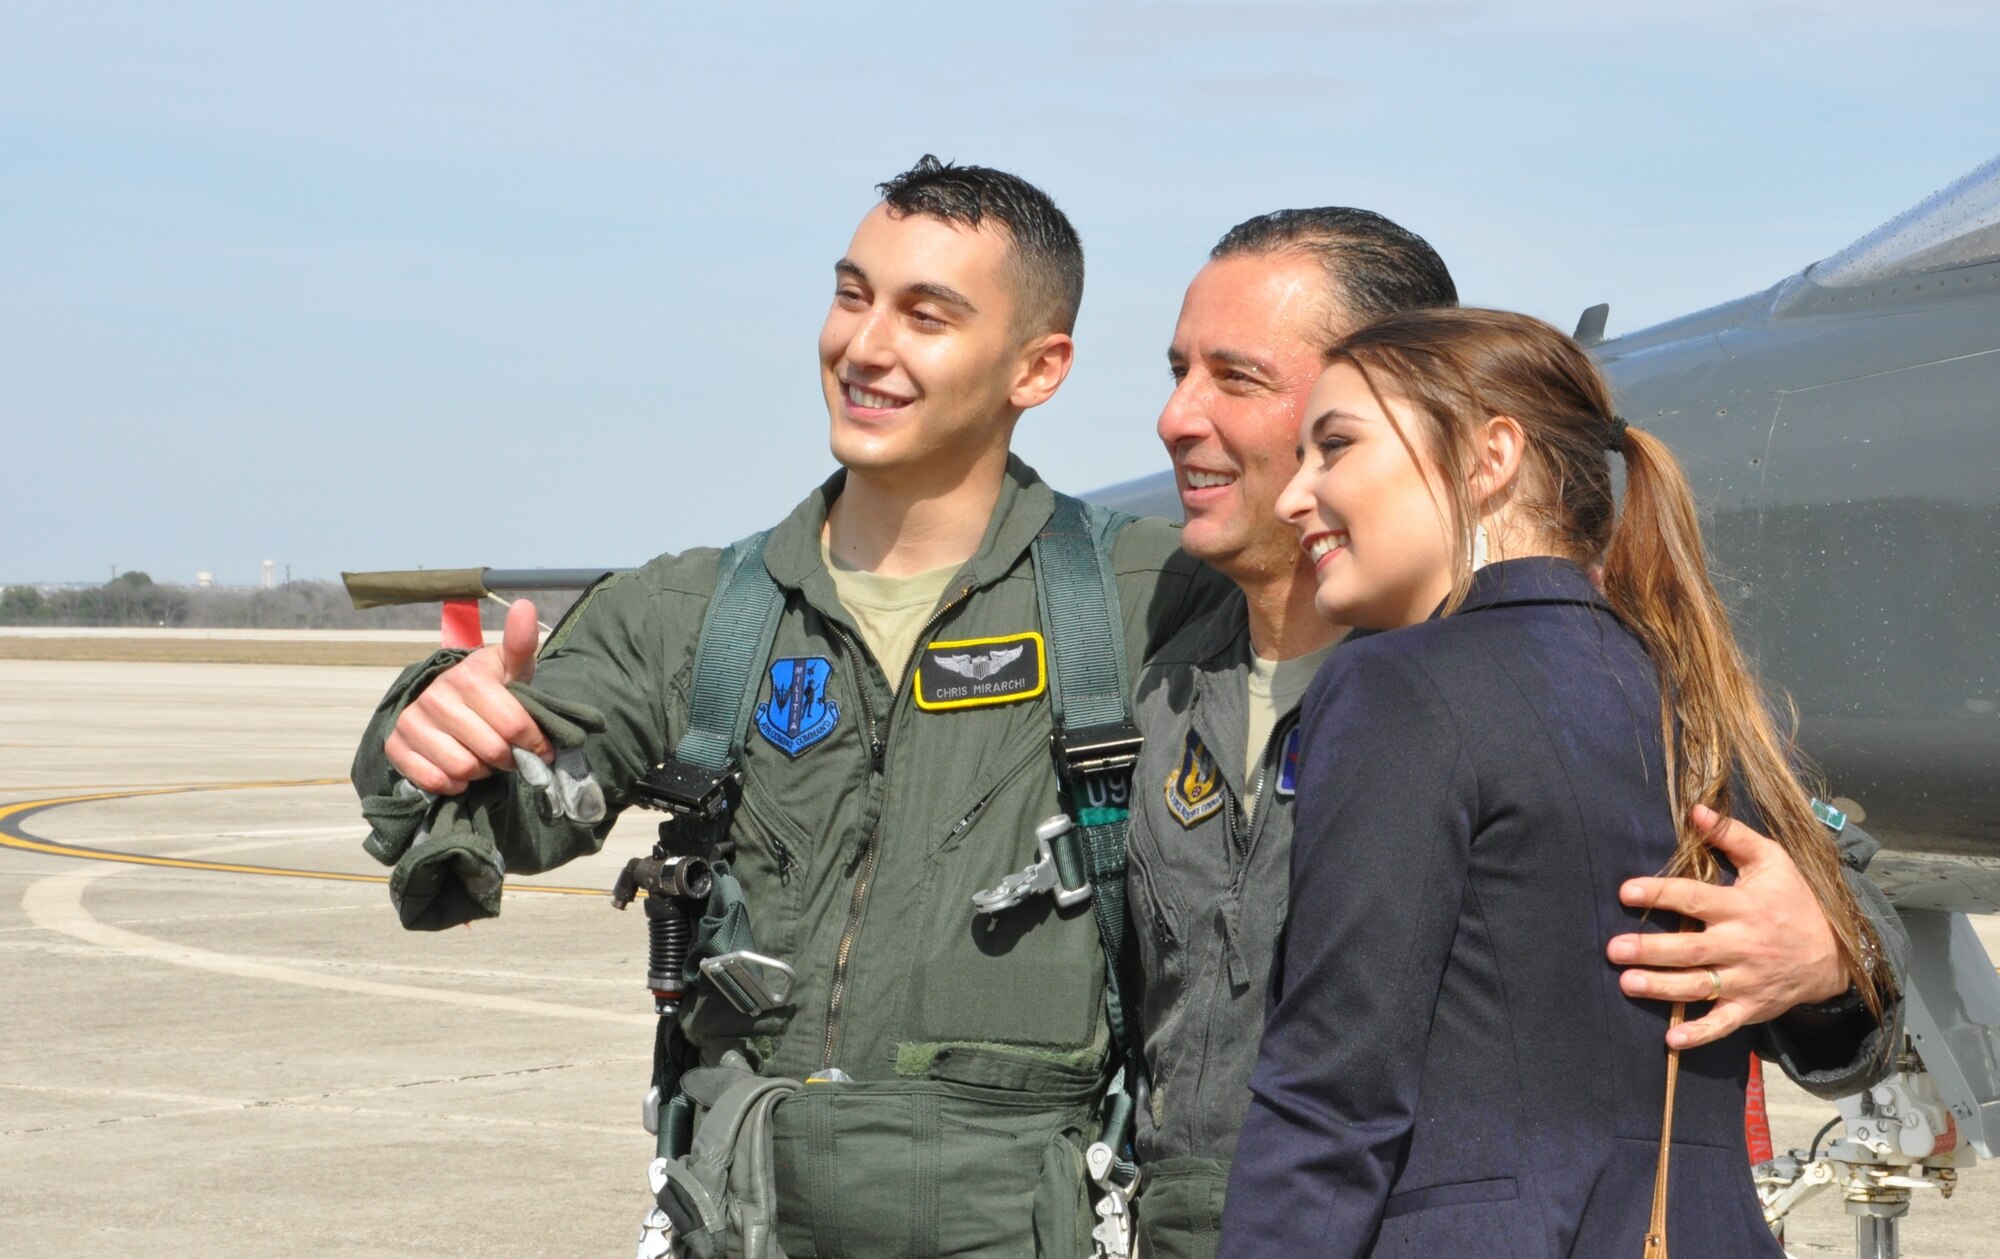 Joe, Chris and Brianna Mirarchi share a photo opportunity following the fini flight. (U.S. Air Force photo by Debbie Gildea)